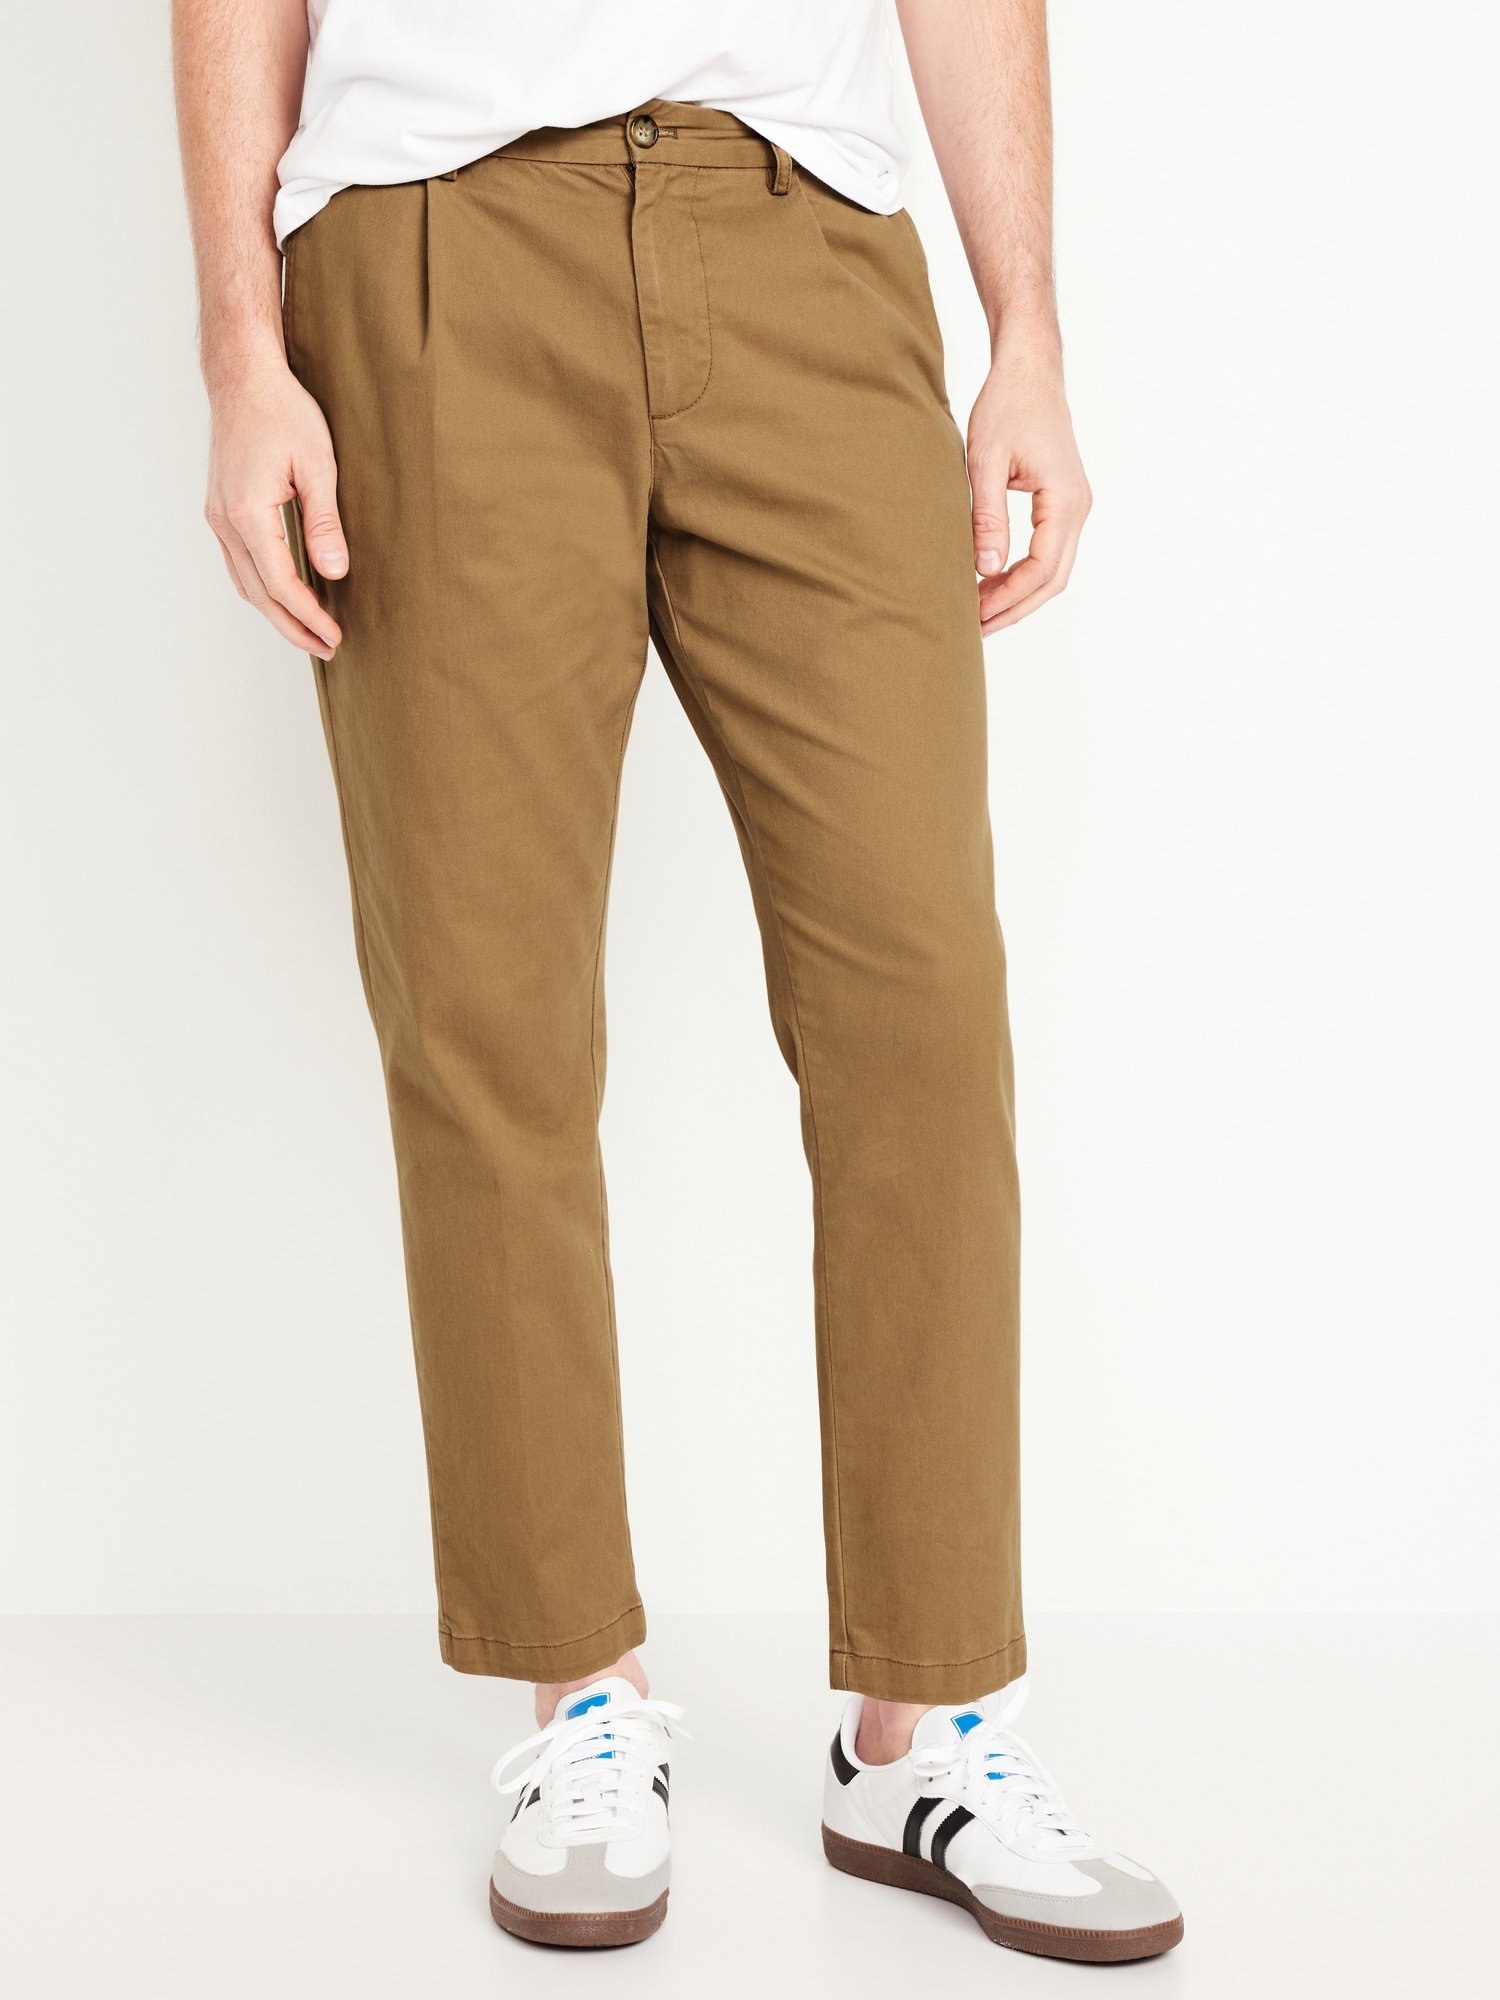 Loose Taper Built-In Flex Pleated Ankle Chino Hot Deal